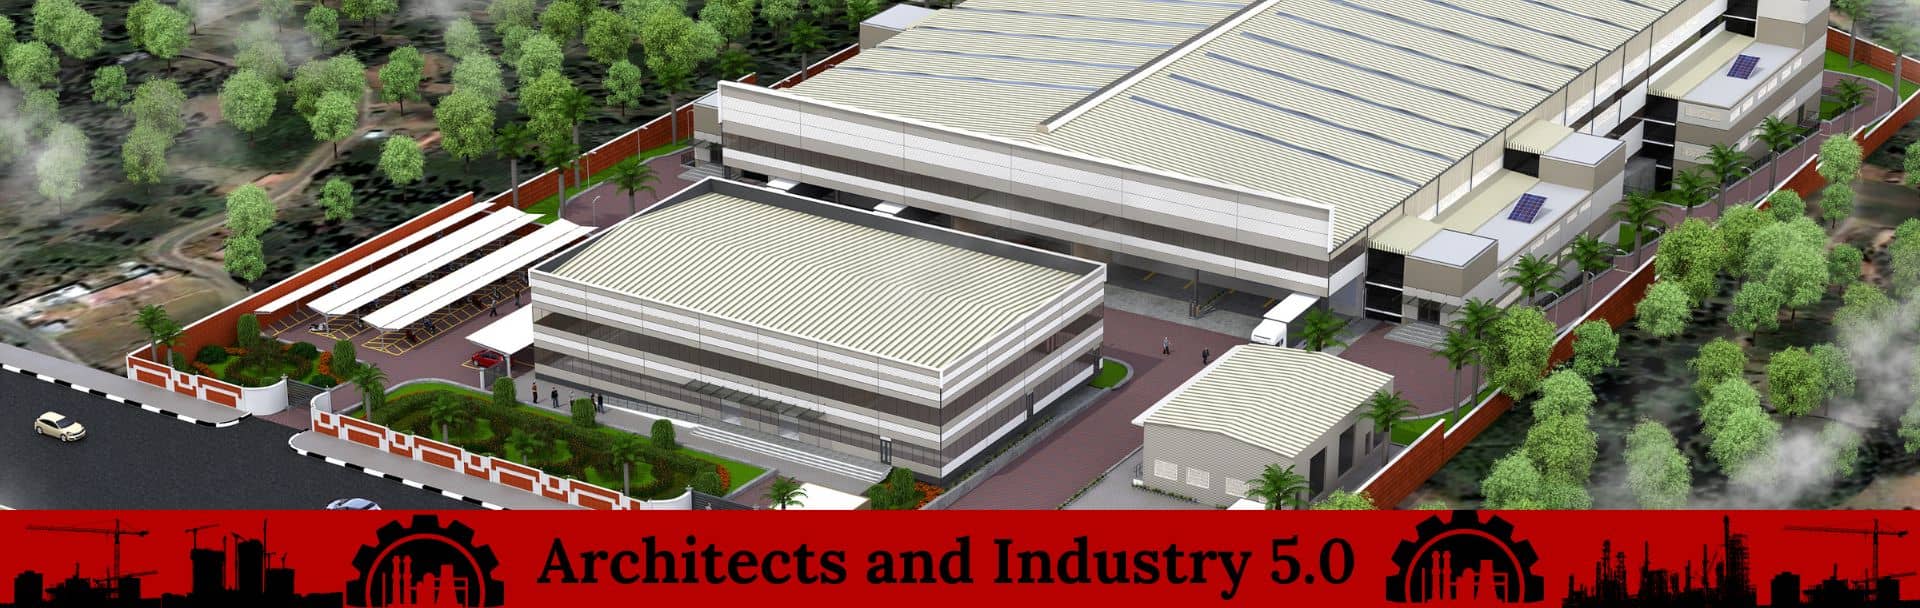 industry architects